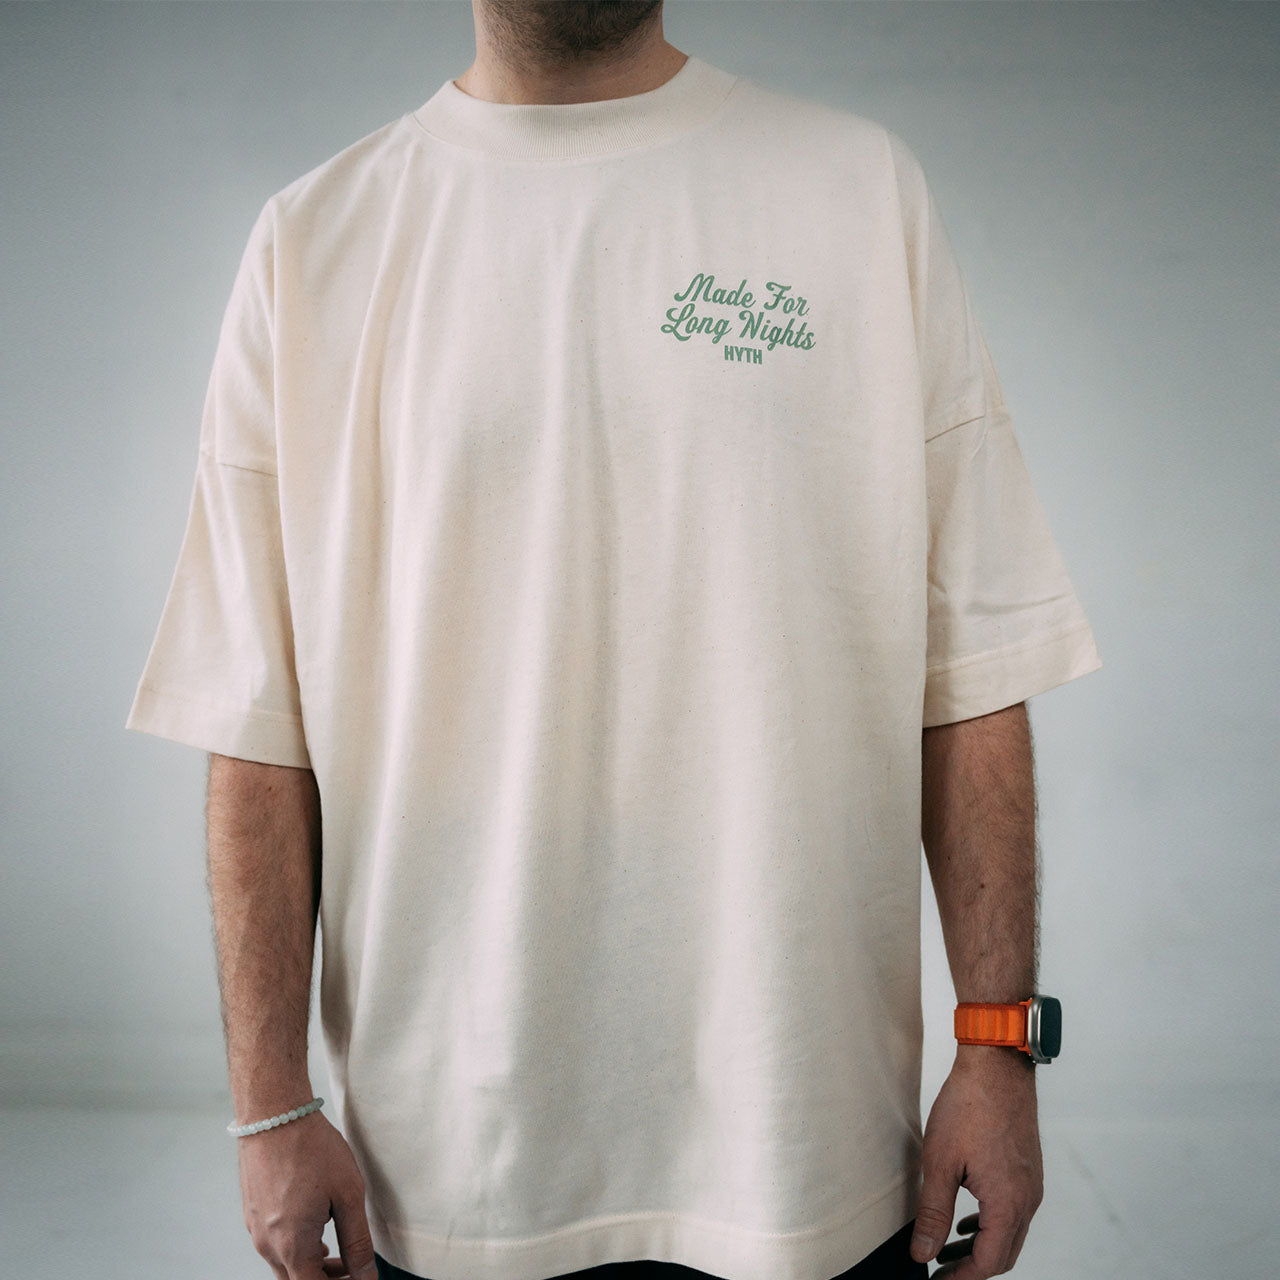 HYTH - Sunday After Hour Rave Club  - Shirt - Beige